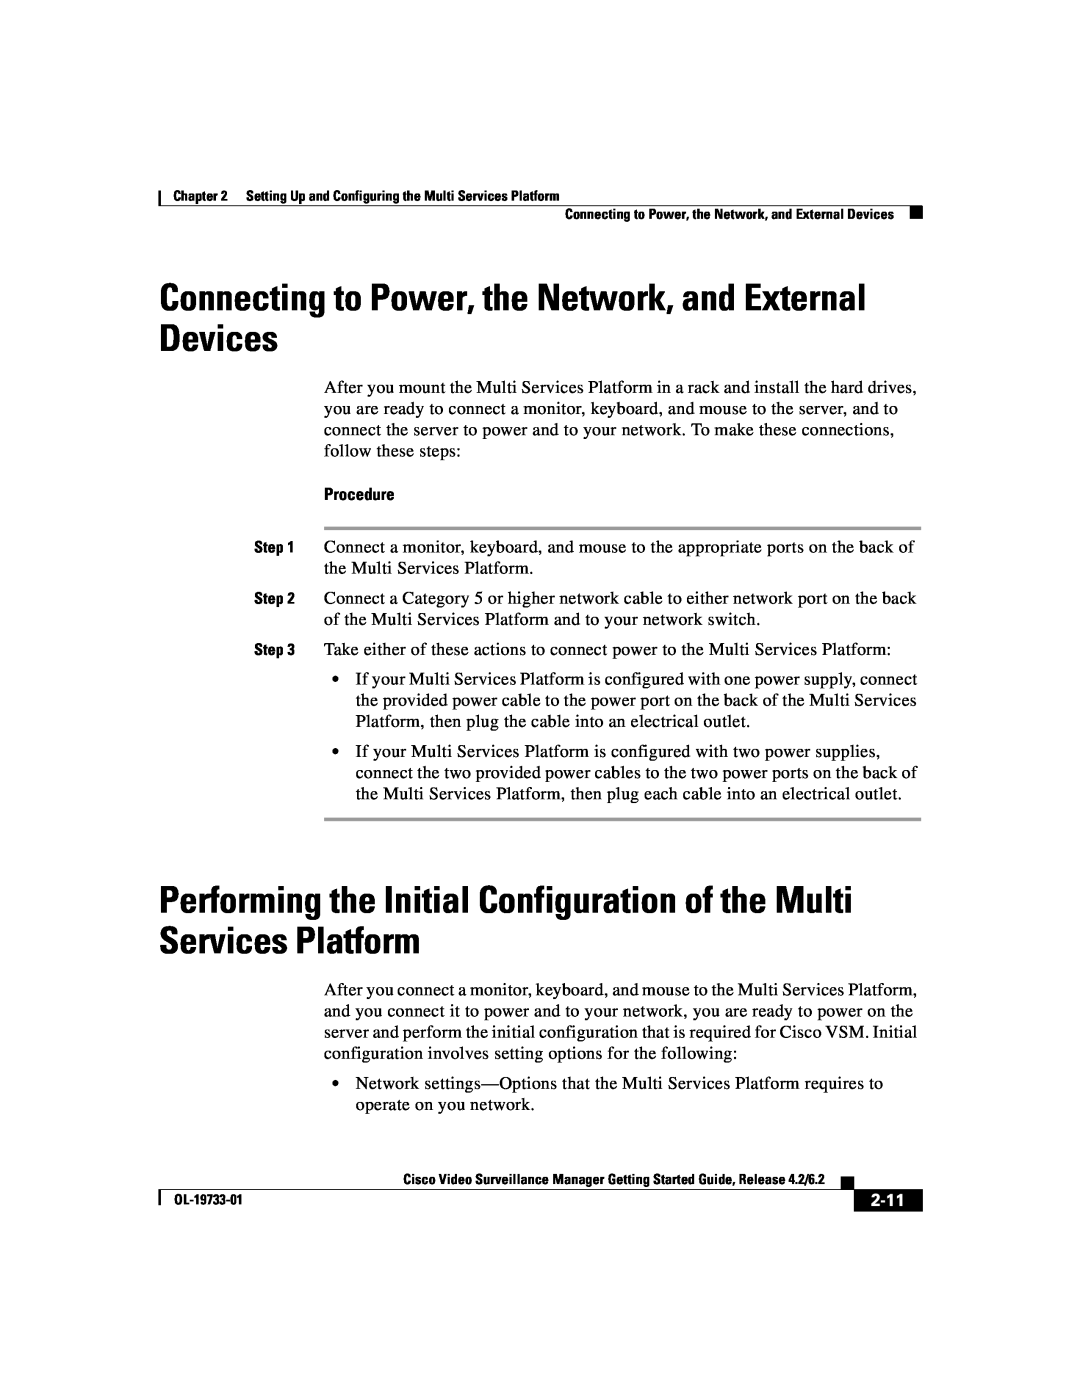 Cisco Systems Release 4.2 manual Connecting to Power, the Network, and External Devices, Procedure, 2-11 